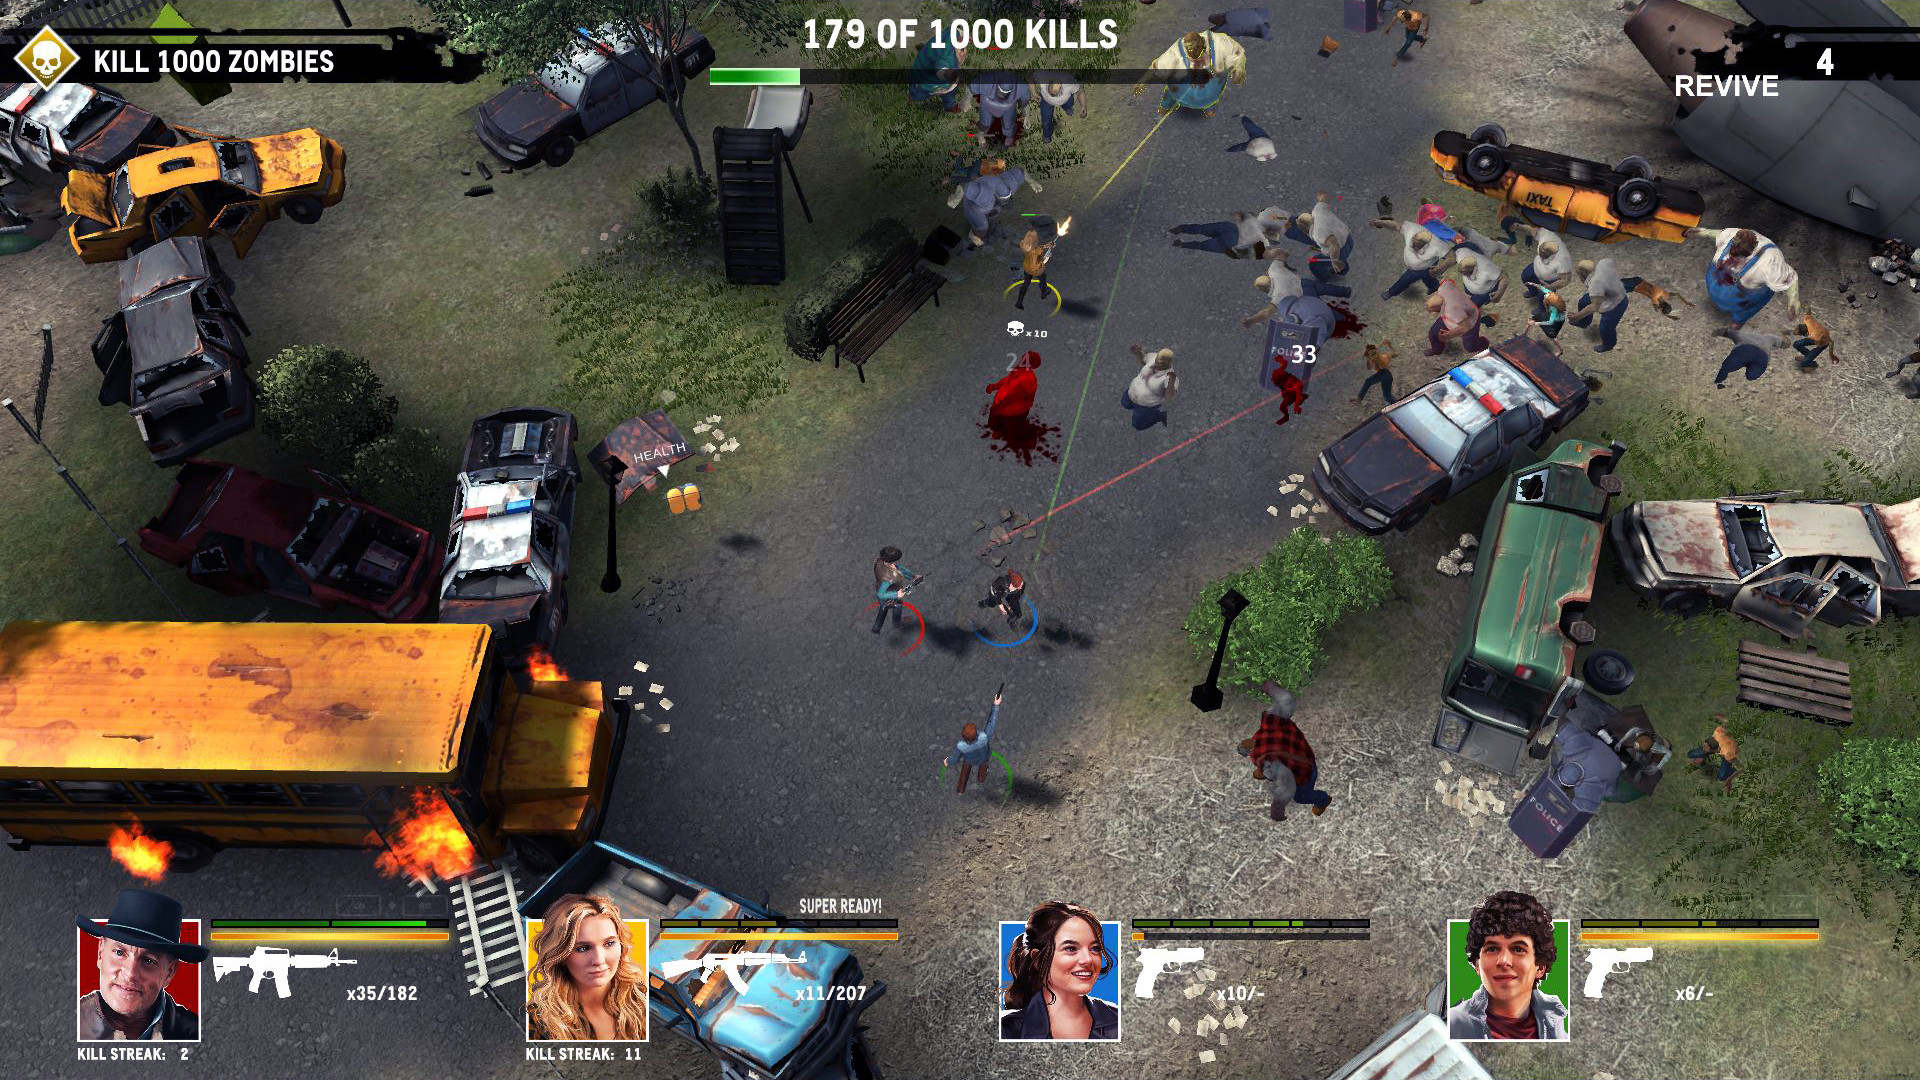 Save 90% on Zombieland: Double Tap - Road Trip on Steam